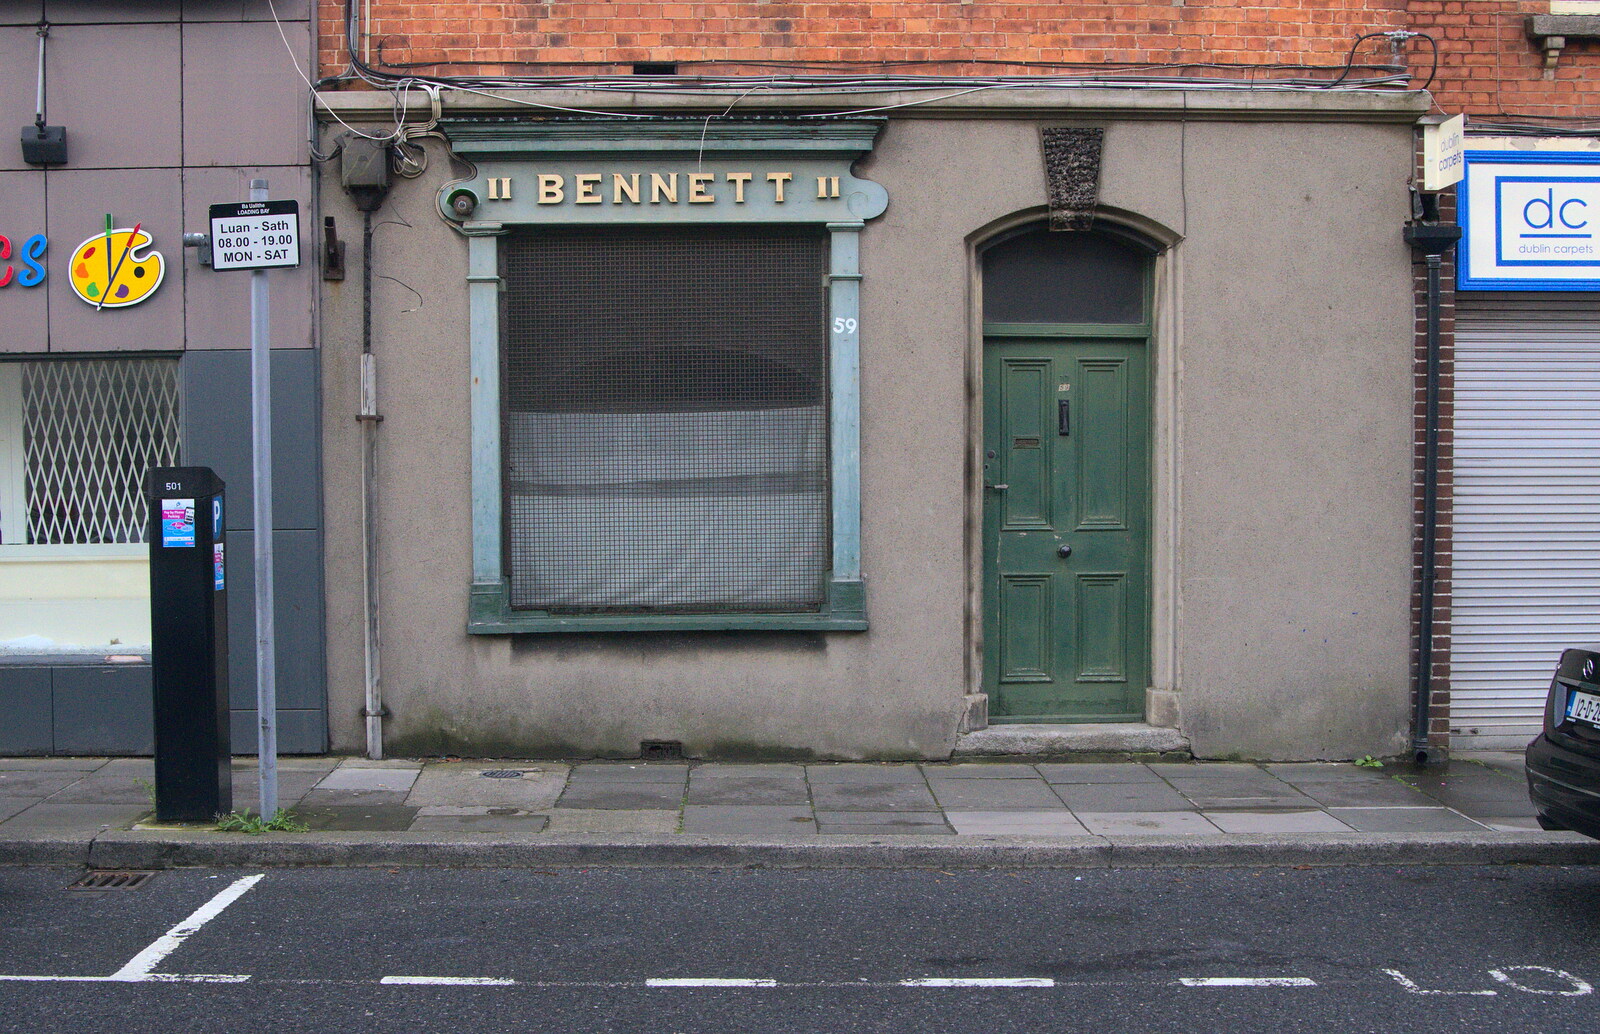 The derelict 'Bennett' in Blackrock from A Night Out in Dublin, County Dublin, Ireland - 9th August 2014